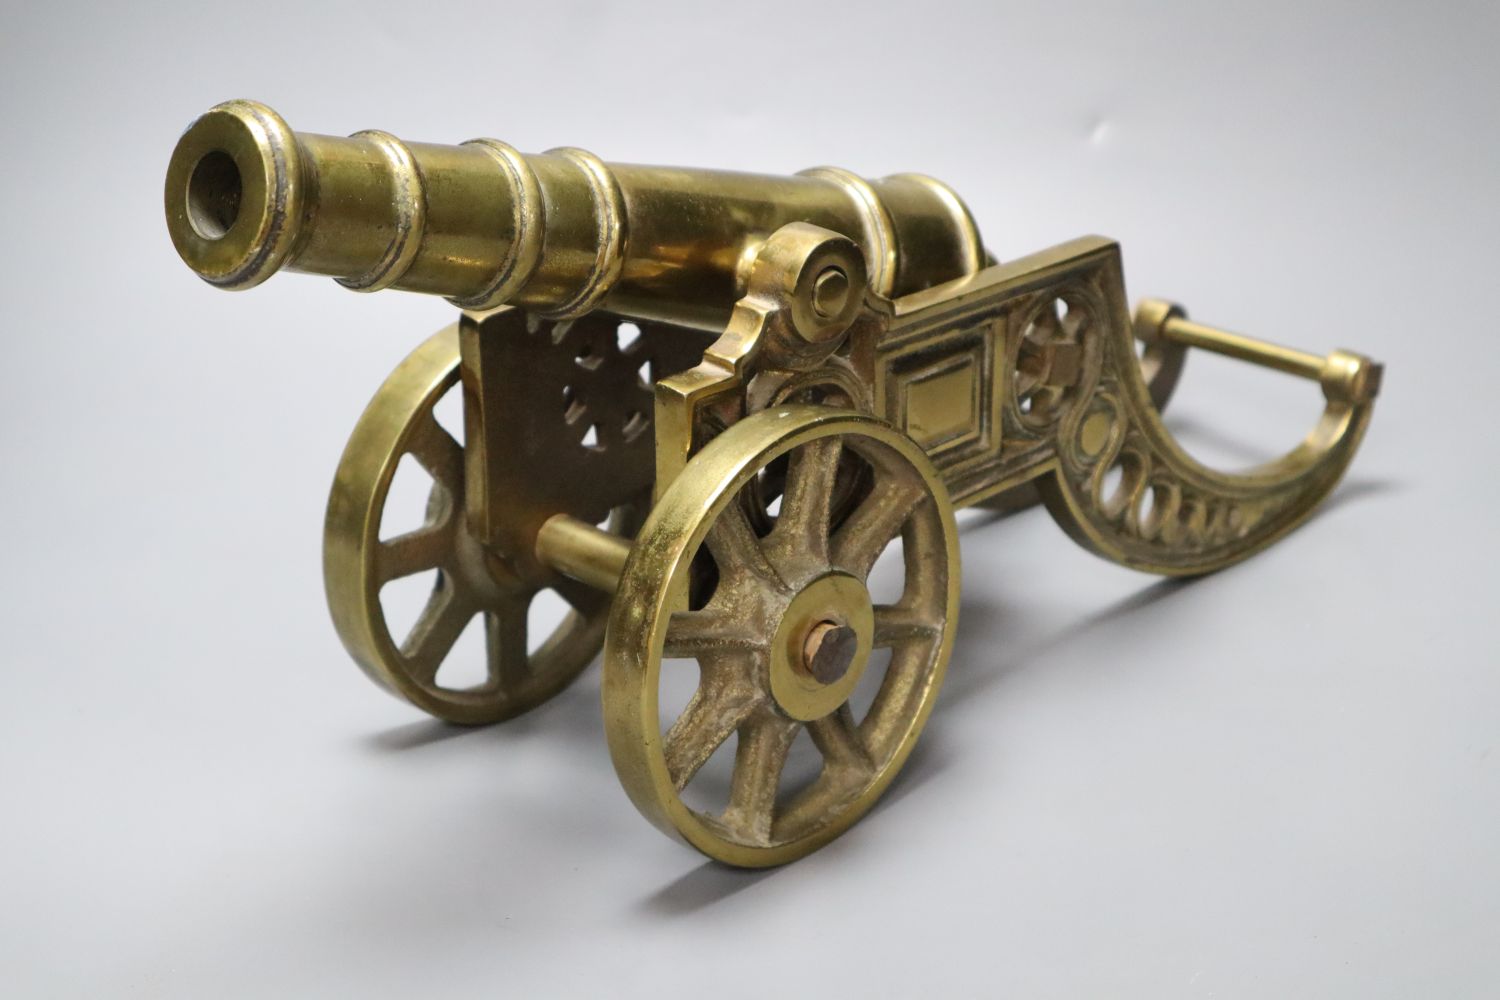 A large brass signal cannon on elaborate carriage, length 42cm